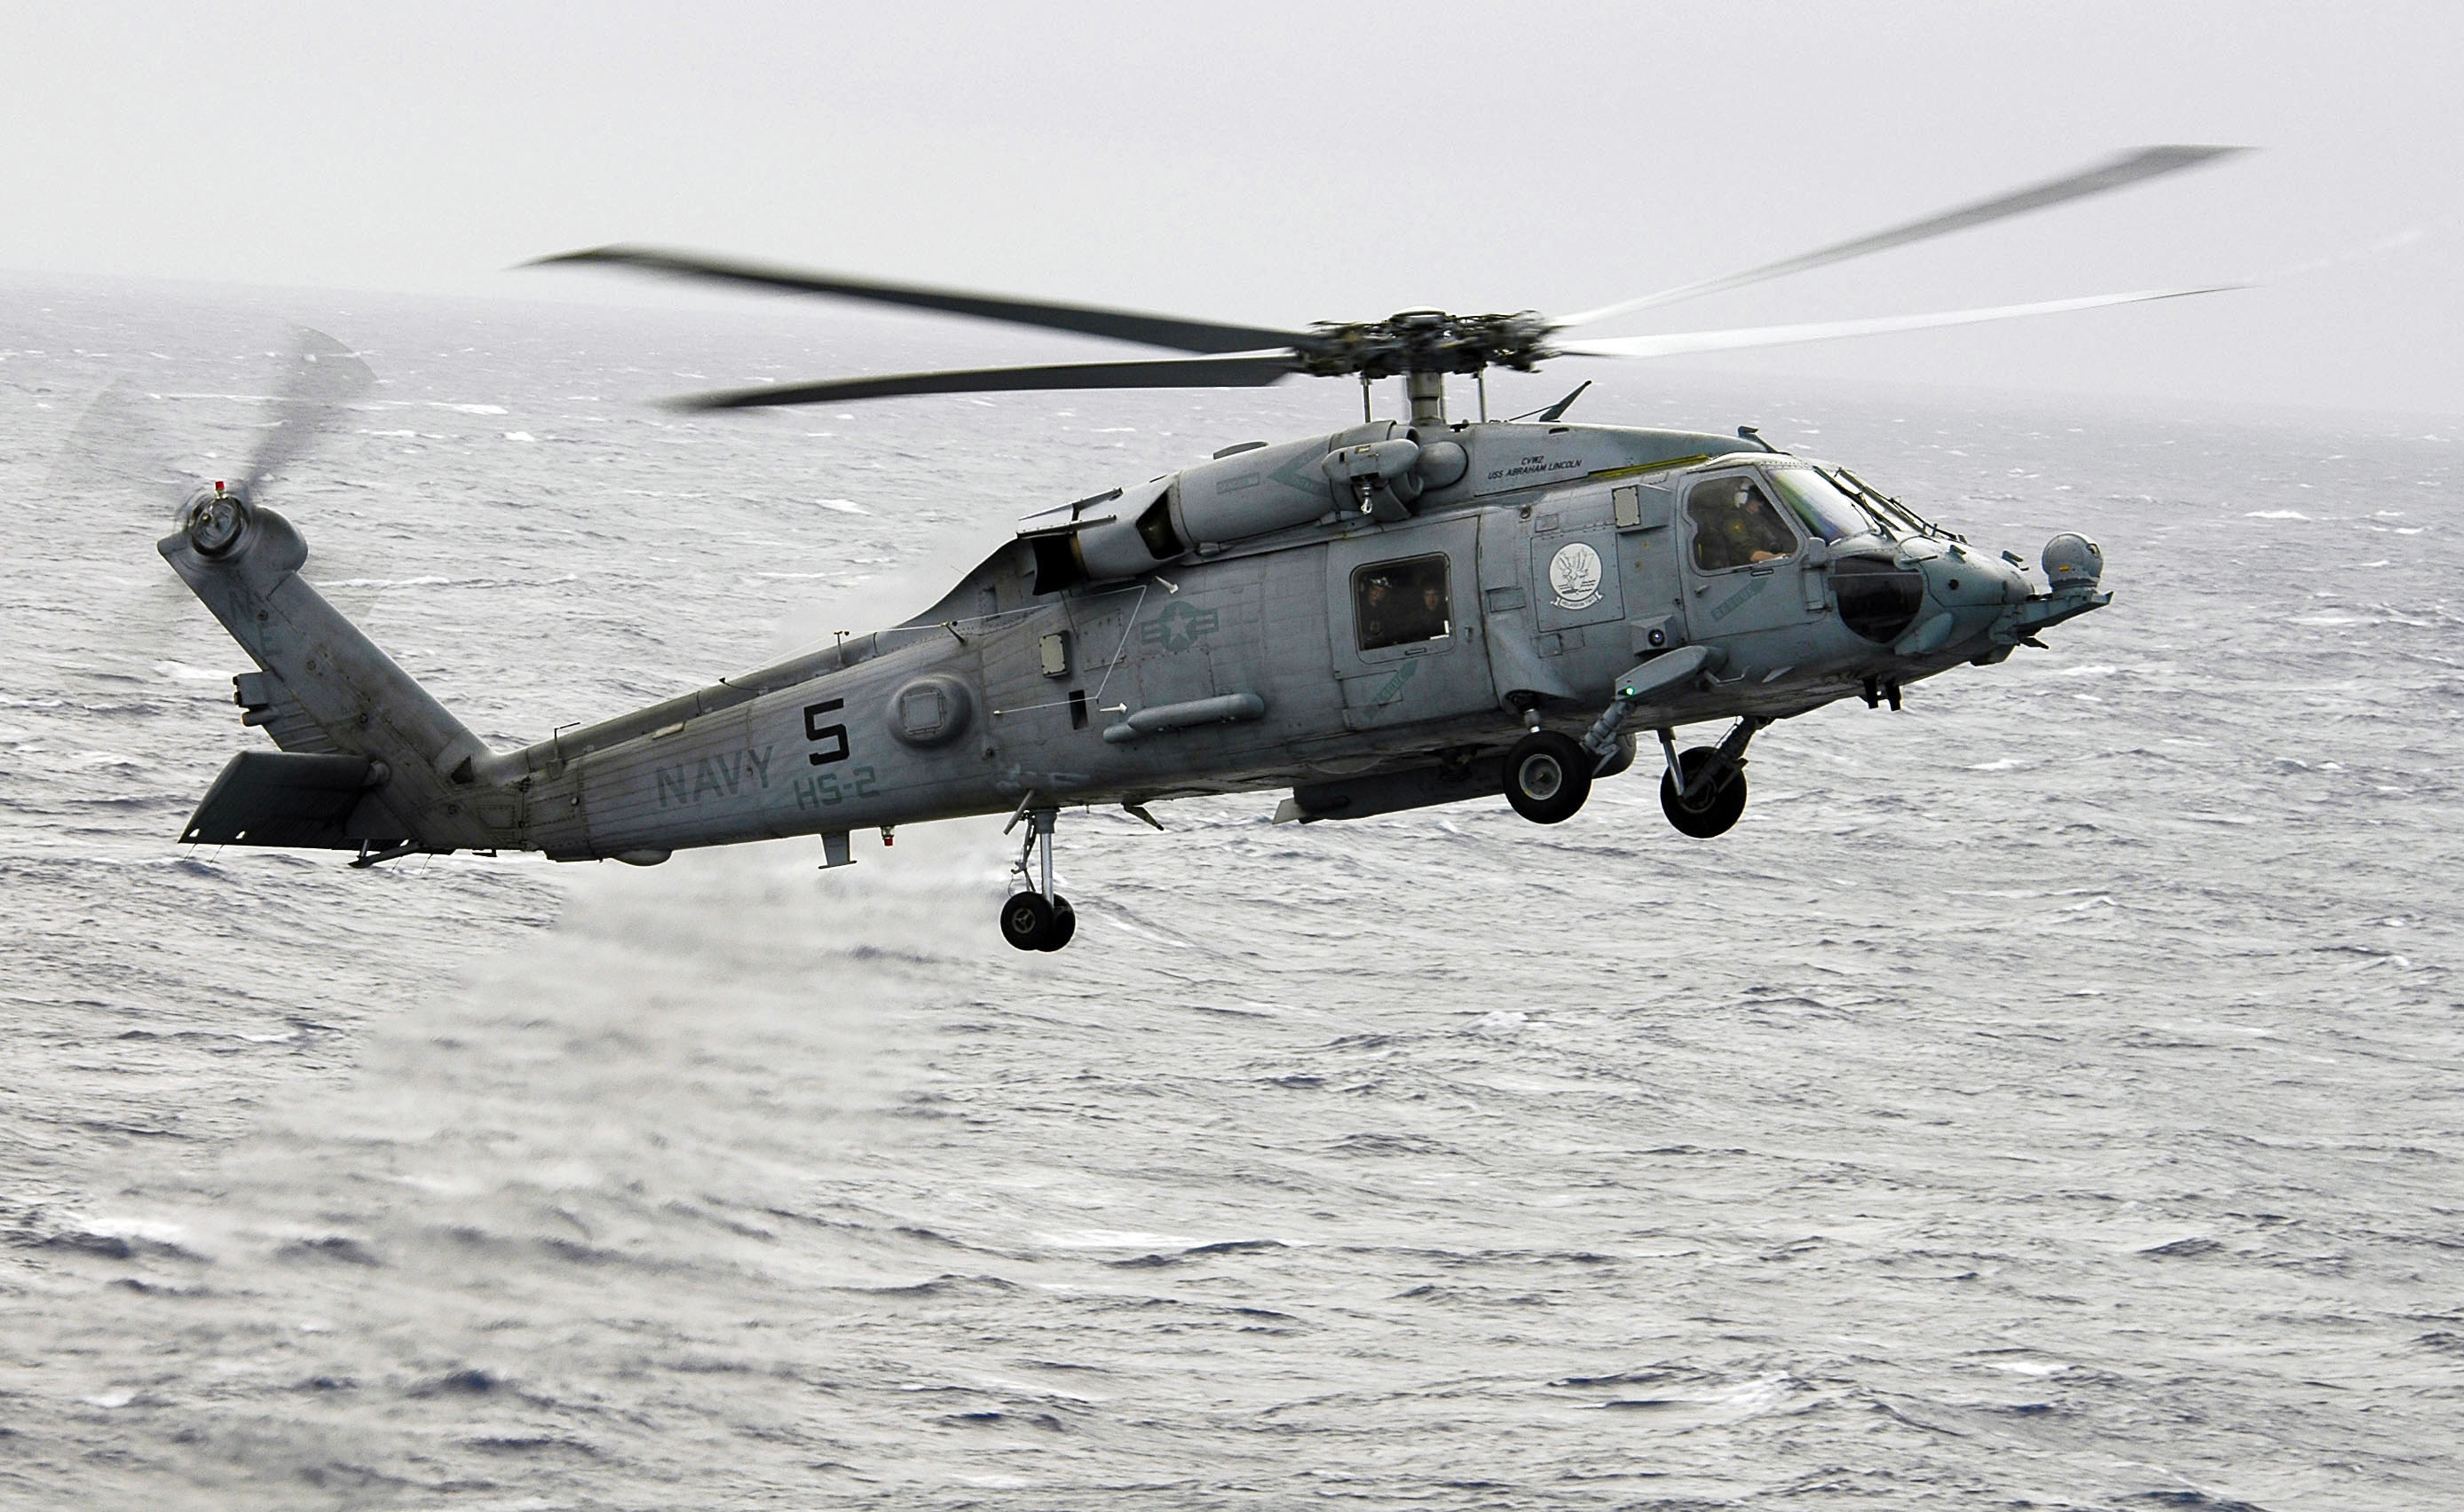 US Navy 060310-N-4166B-027 A SH-60F Seahawk helicopter assigned to Helicopter Anti-Submarine Squadron Two (HS-2) flies toward the Nimitz-class aircraft carrier USS Abraham Lincoln (CVN 72) for a landing